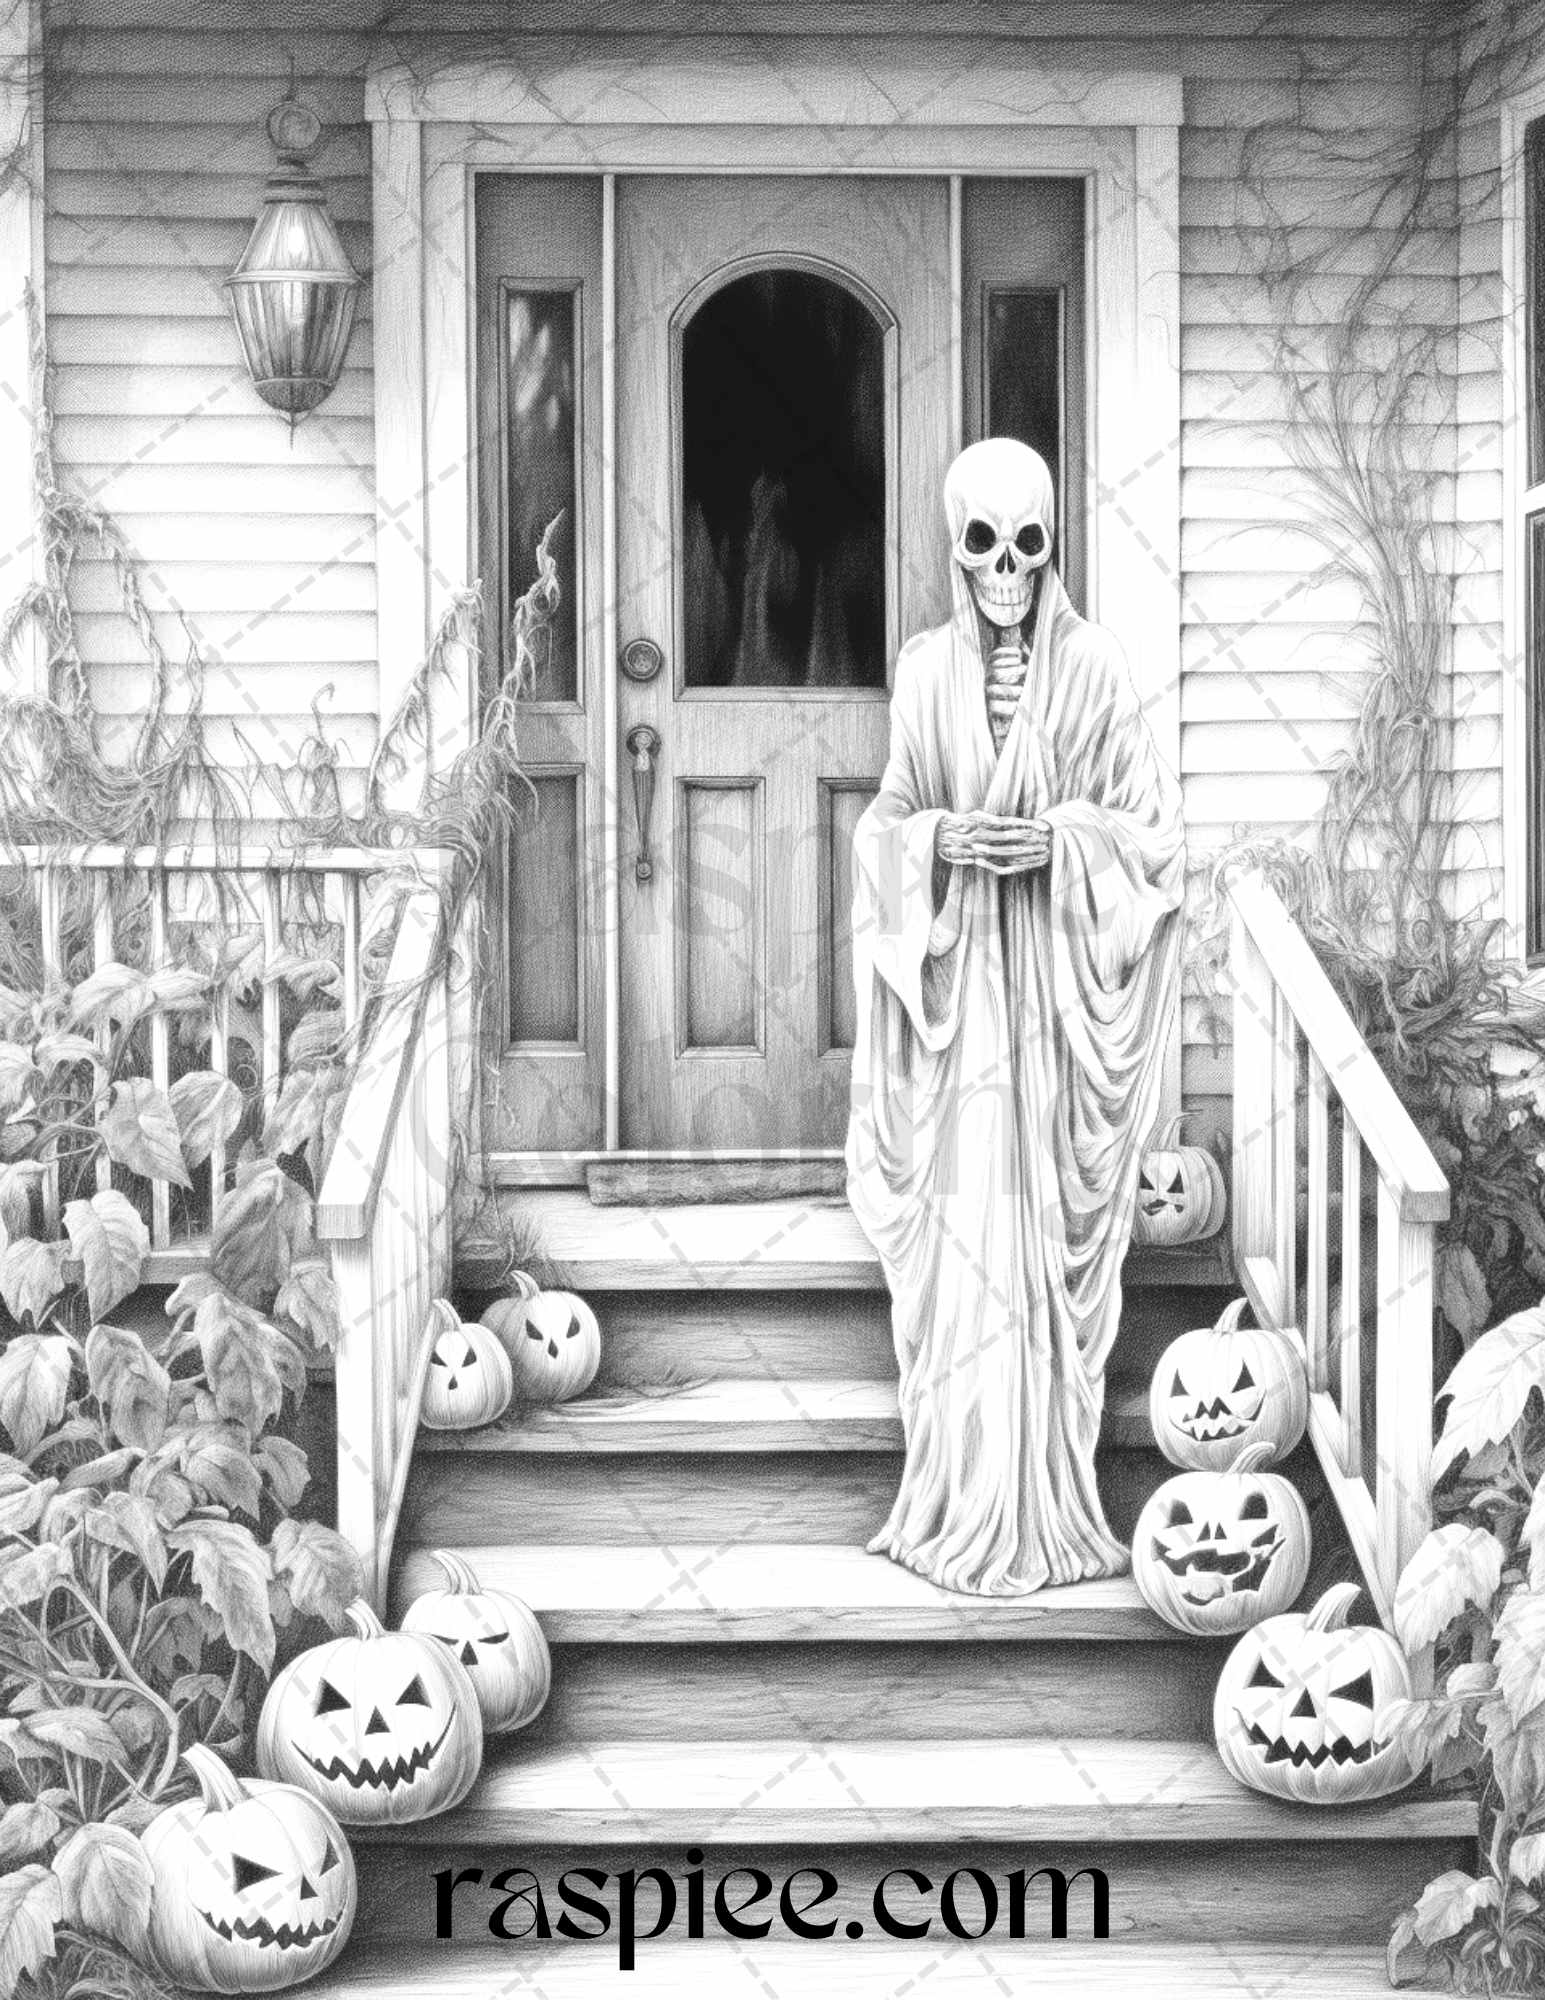 Halloween home decor coloring pages, Spooky haunted house coloring sheets, Autumn-themed adult coloring printables, Macabre Halloween coloring pages, Gothic pumpkin patterns for coloring